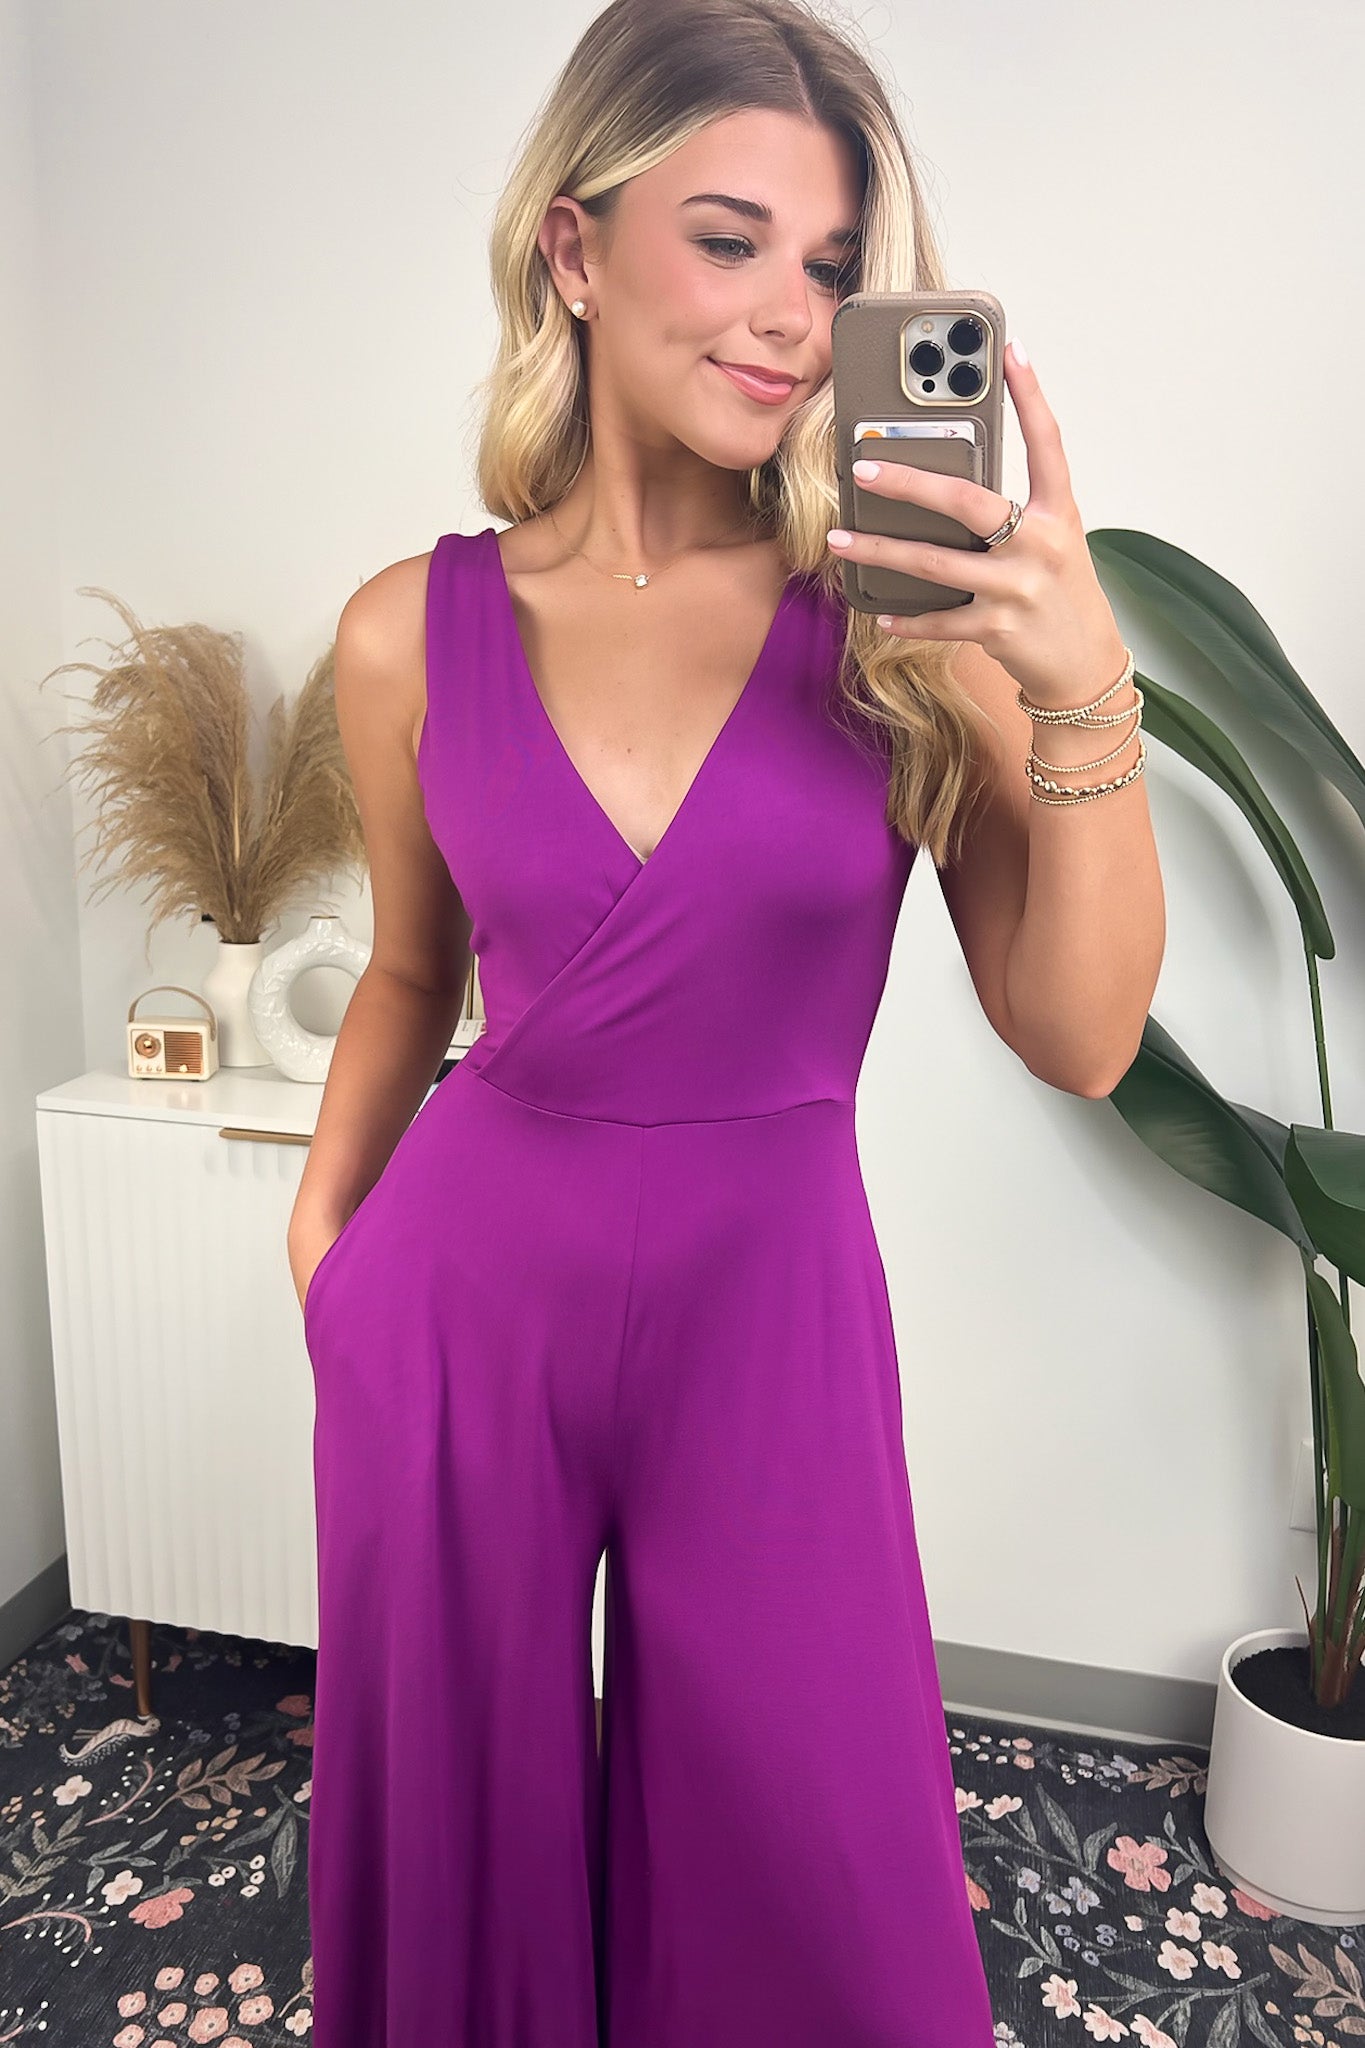  Luxe Reputation Surplice Wide Leg Jumpsuit - Madison and Mallory